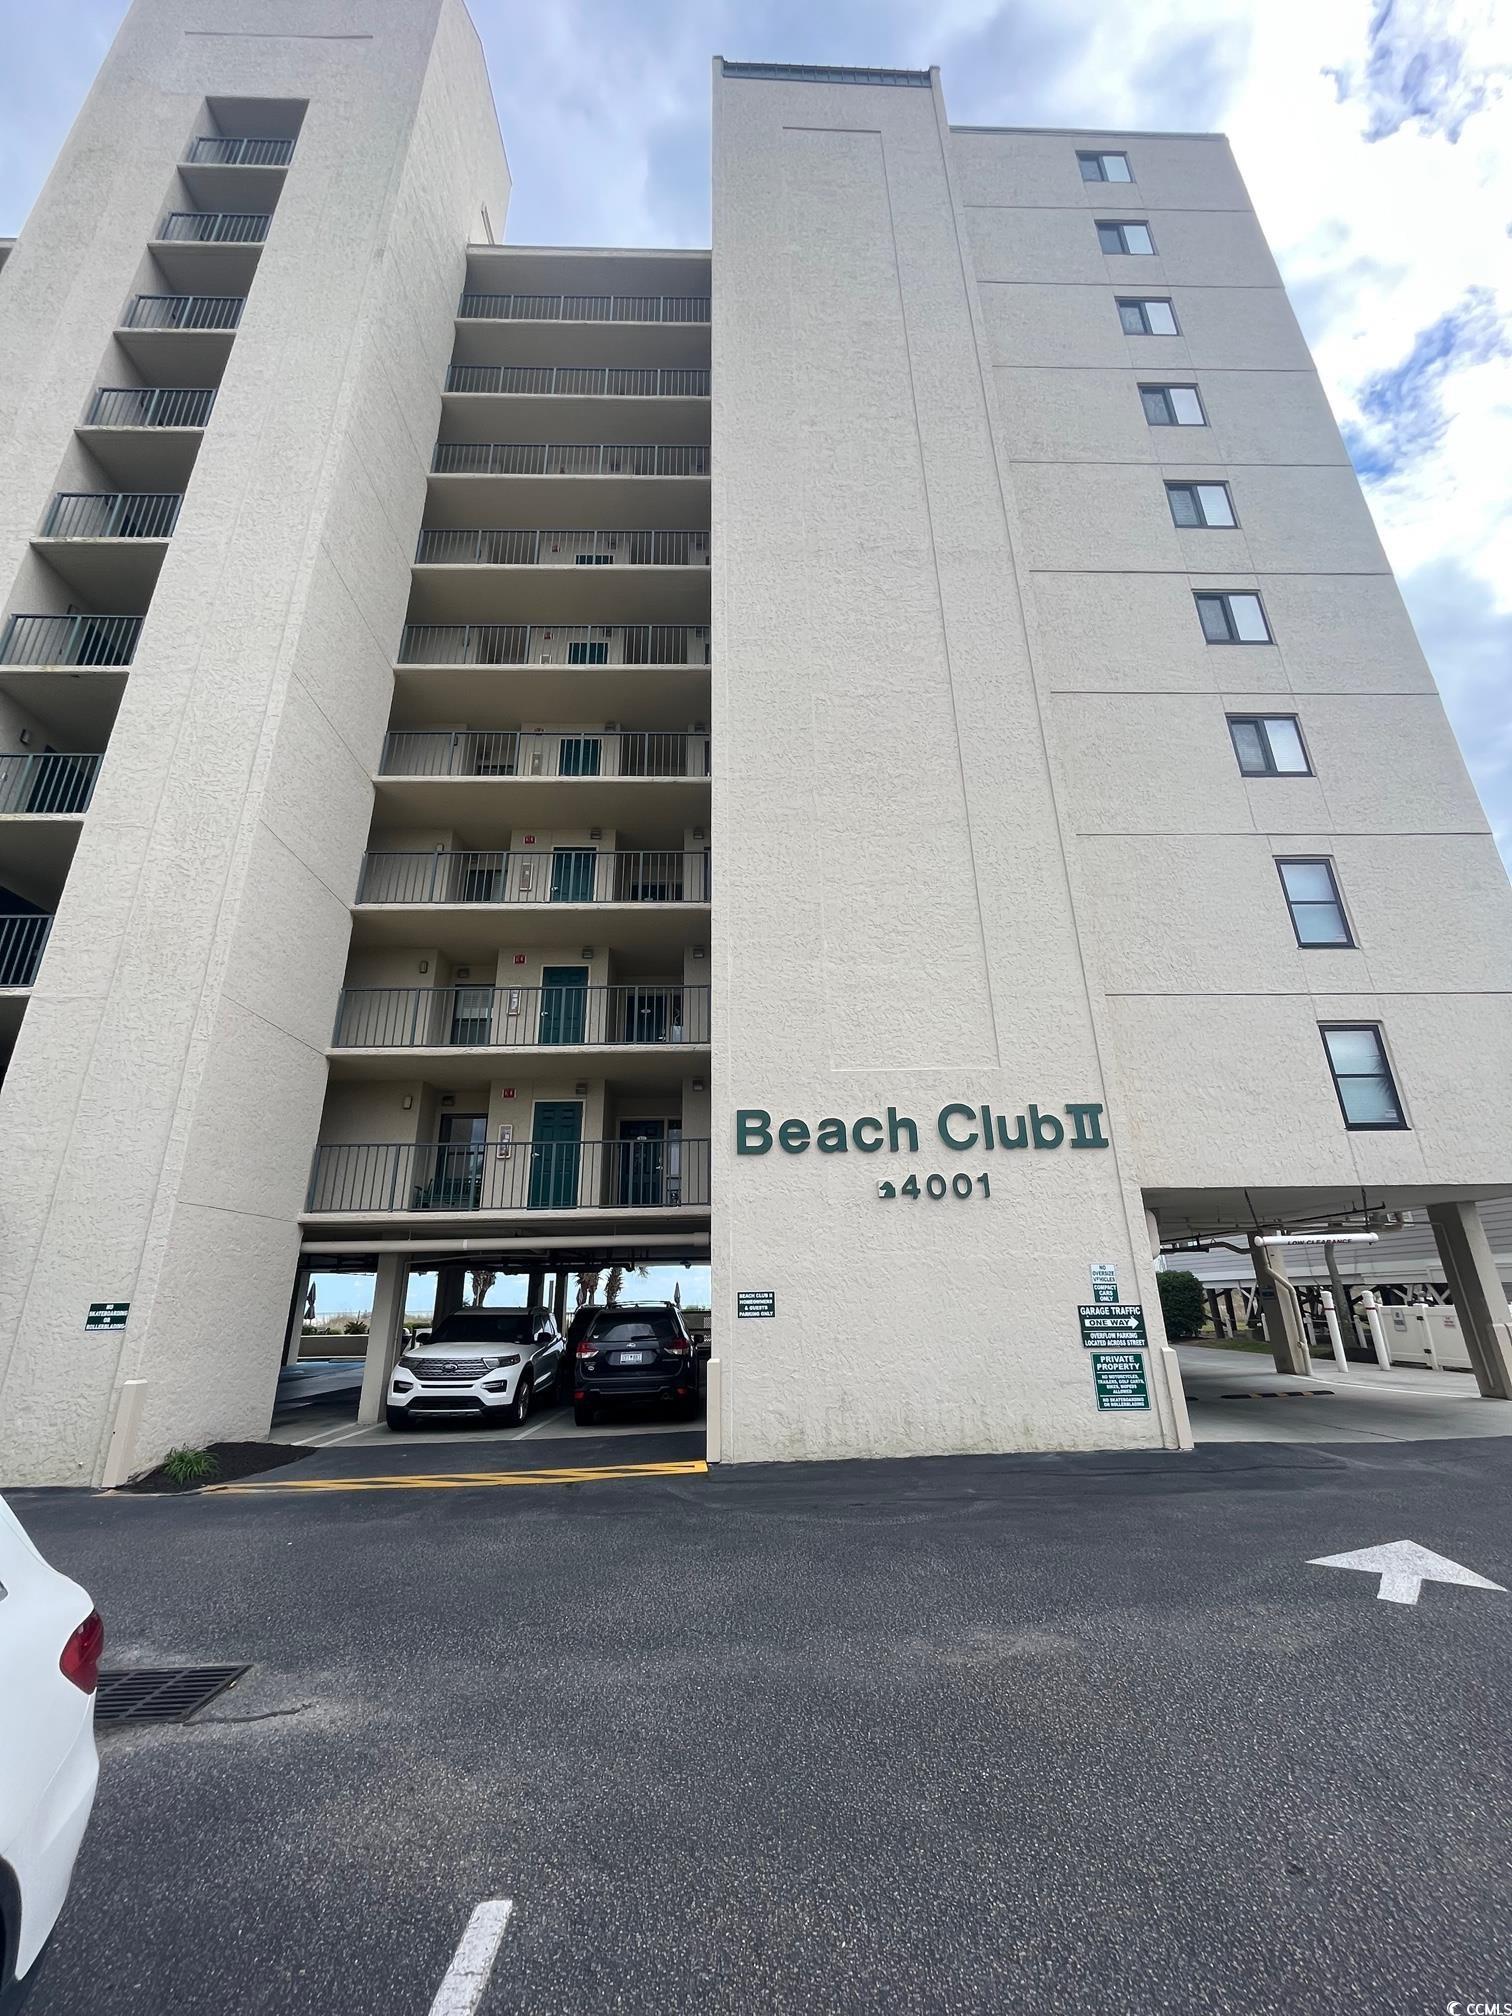 ocean front, 3 bedroom, 3 bath condo very well maintained and wonderful views! this condo boasts 2 pools, direct beach access and a grill area. its a charmer!